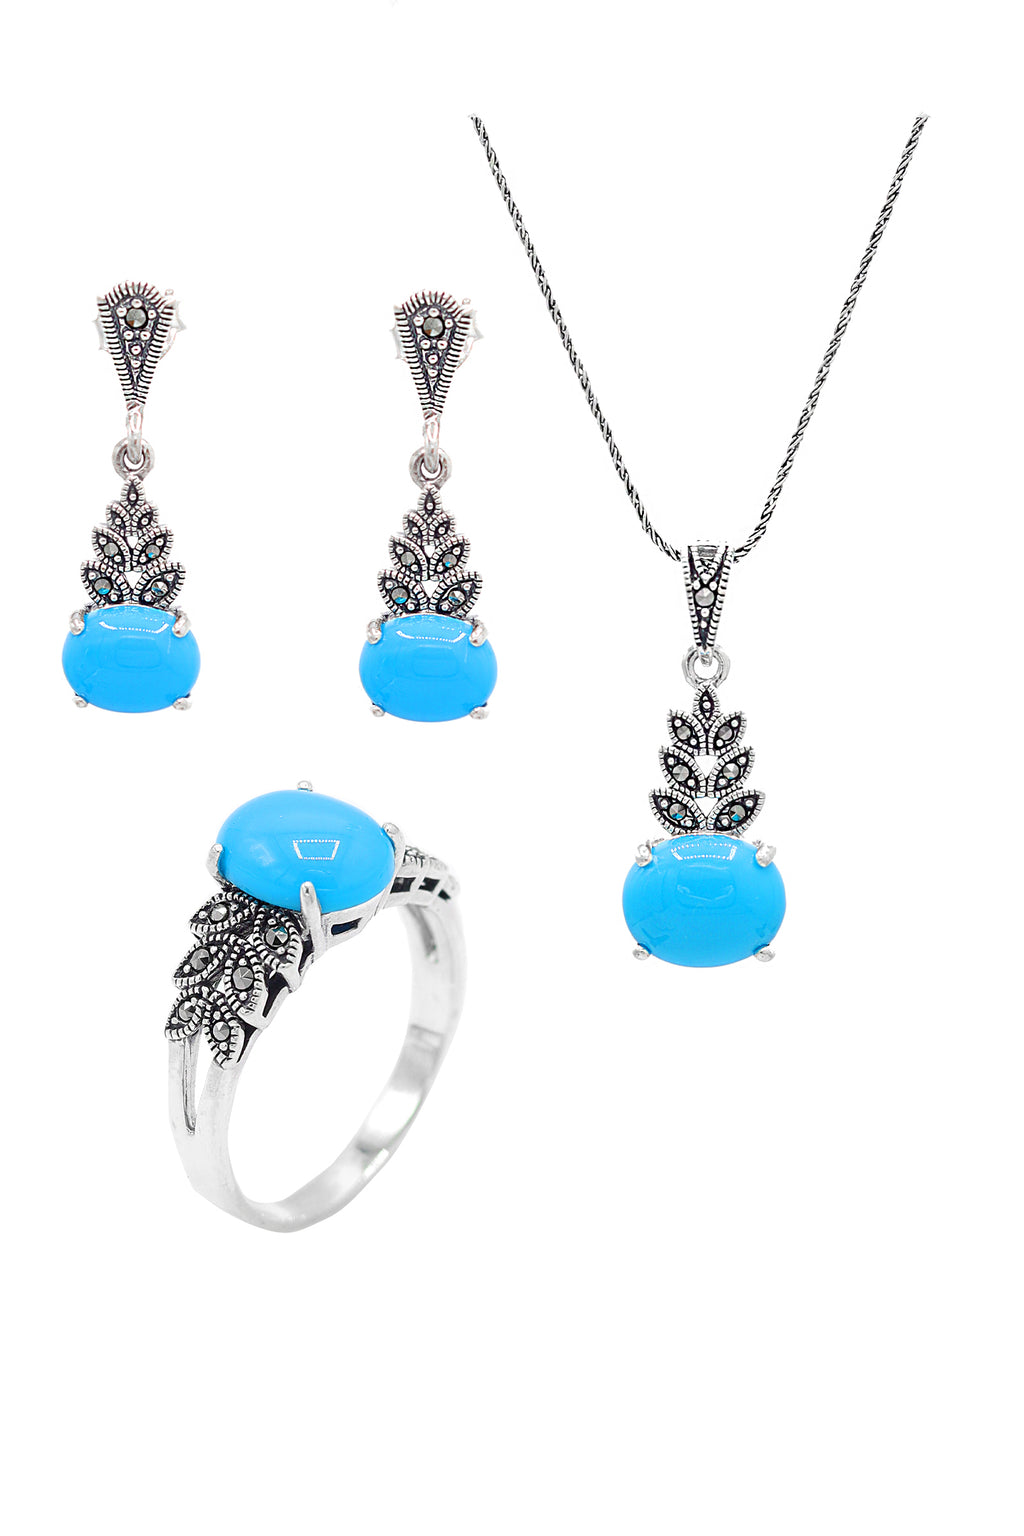 Leaf Model Silver Triple Jewelry Set With Turquoise (NG201021923)